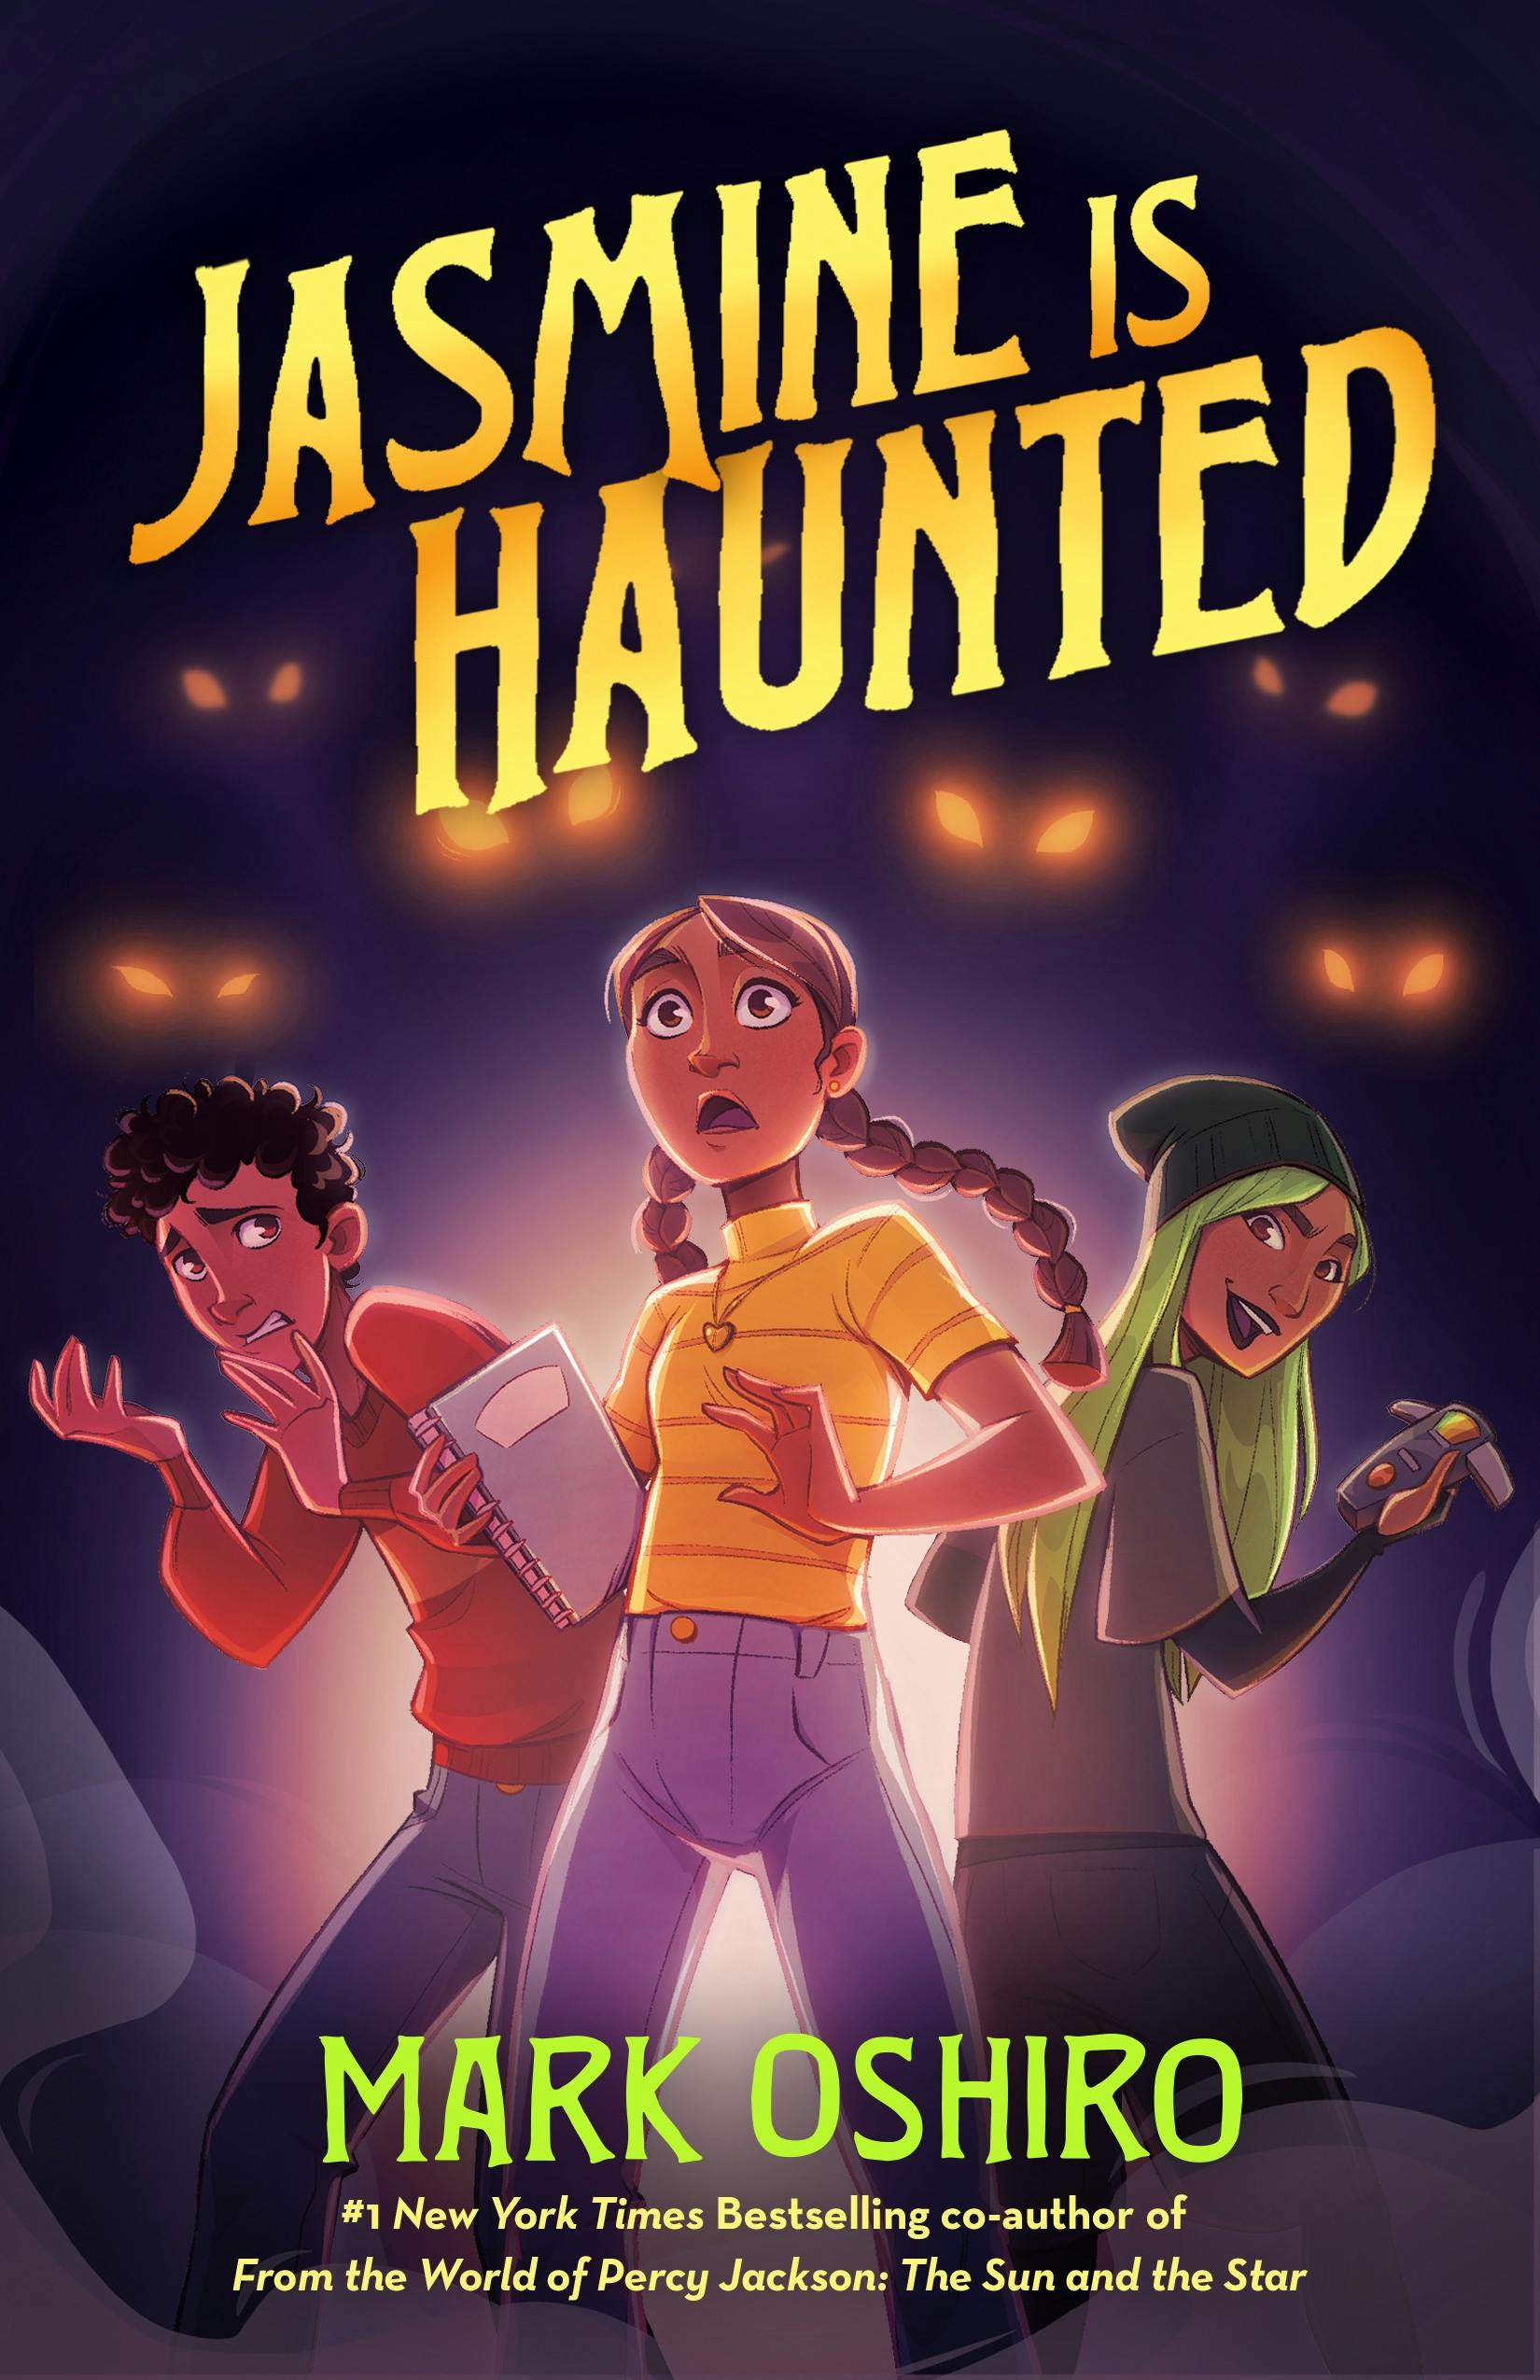 Cover for the book titled as: Jasmine Is Haunted